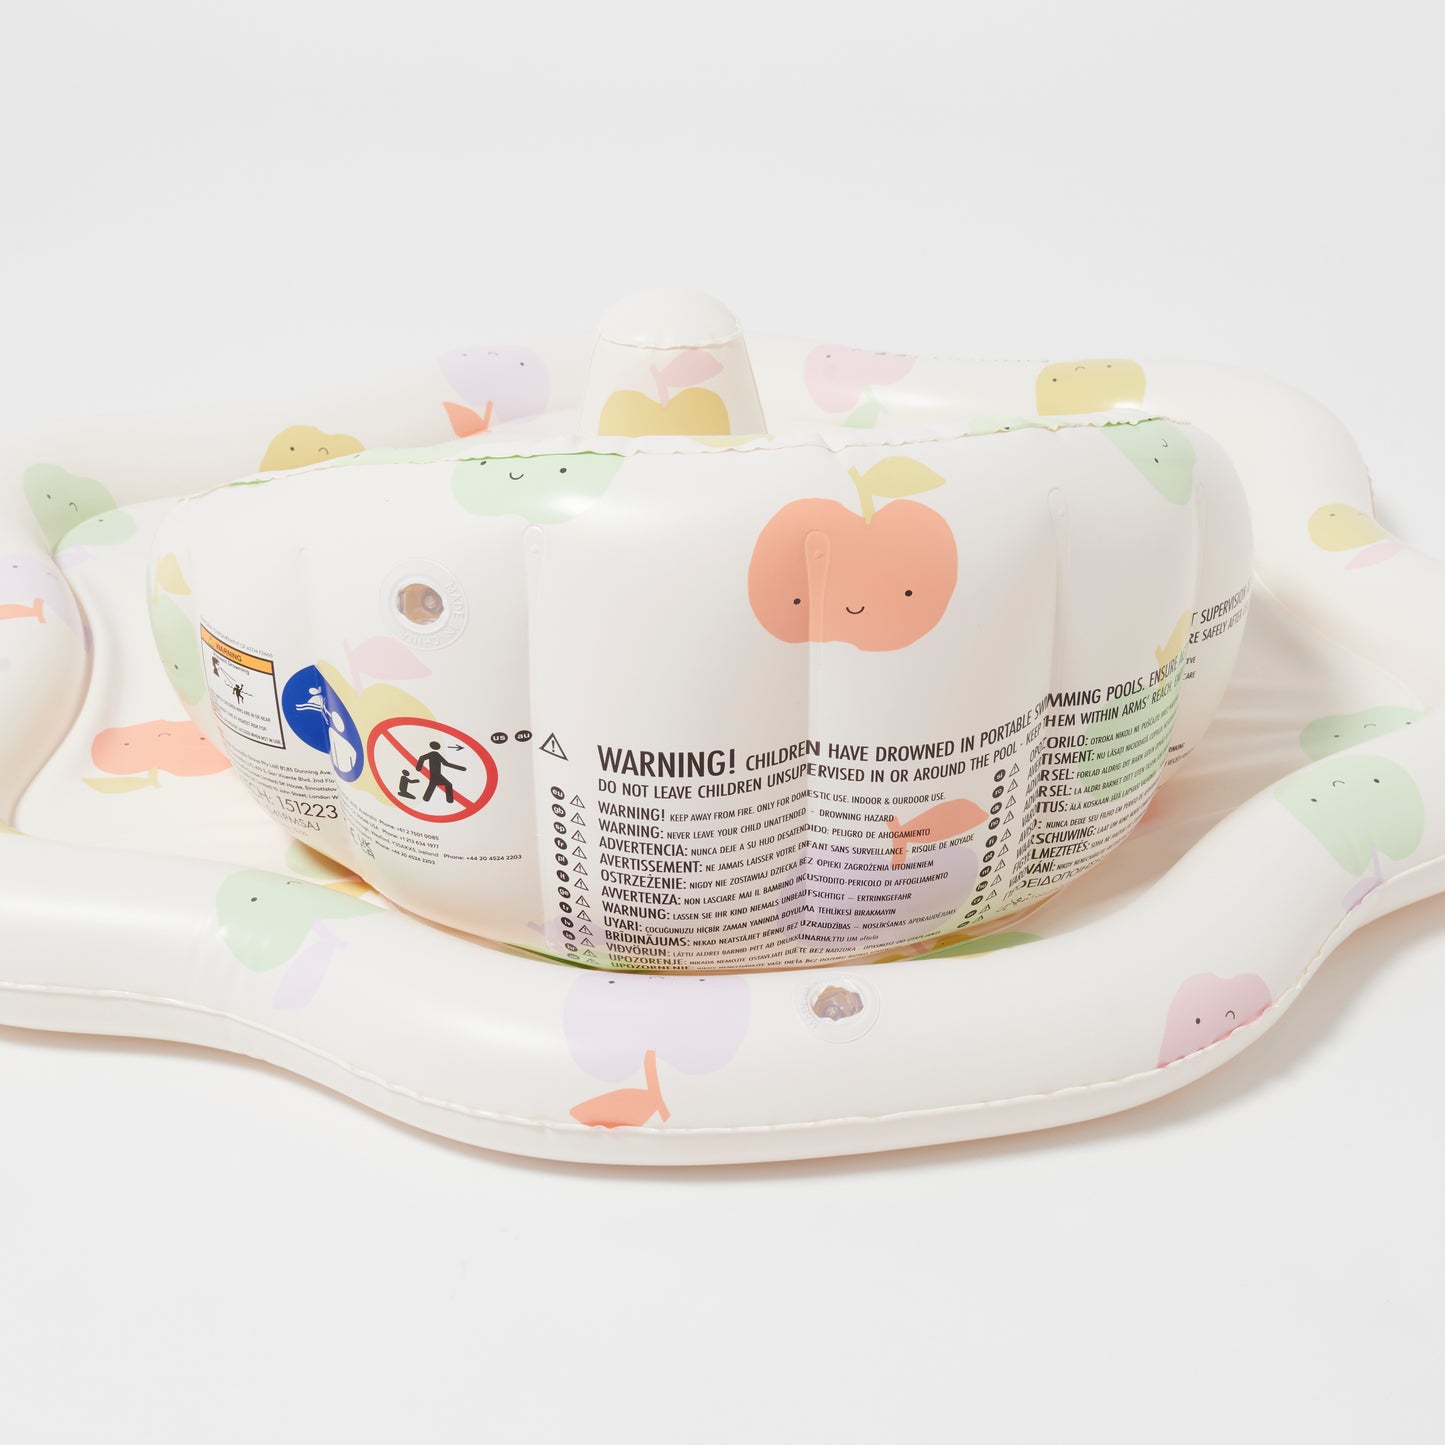 Apple Sorbet Baby Playmat with Shade